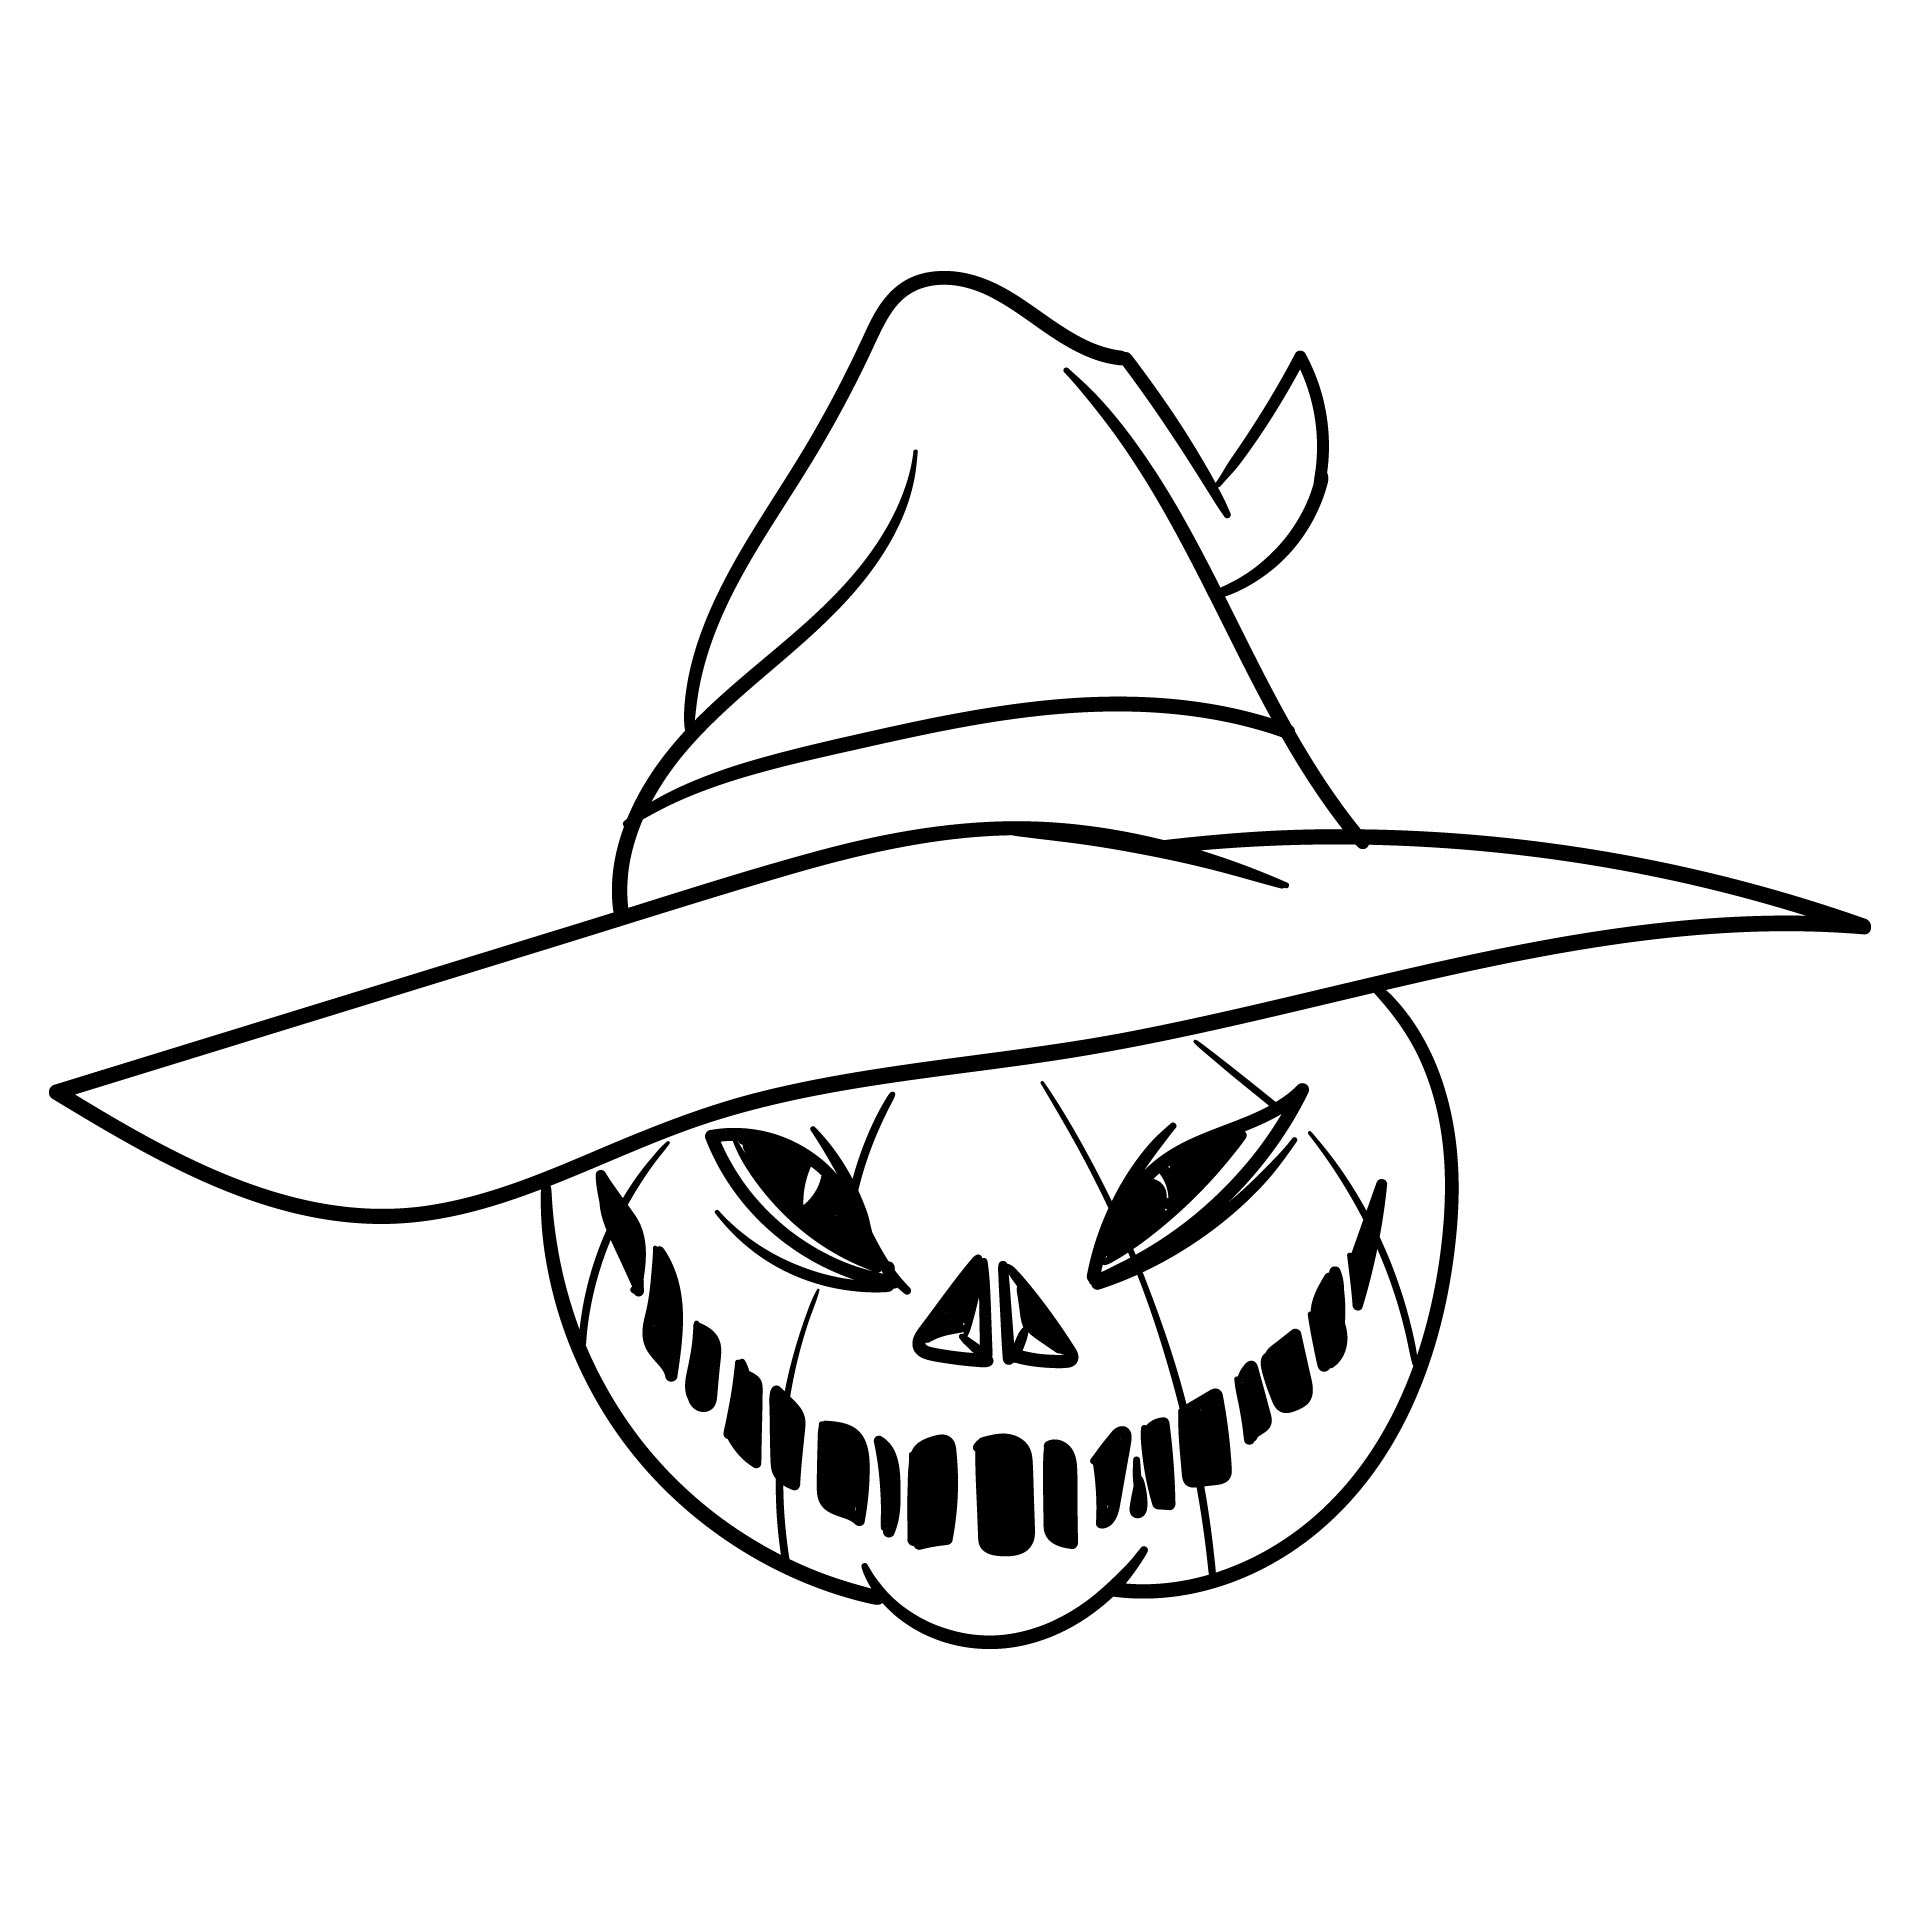 Printable Halloween Pumpkin Coloring Pages For Adults